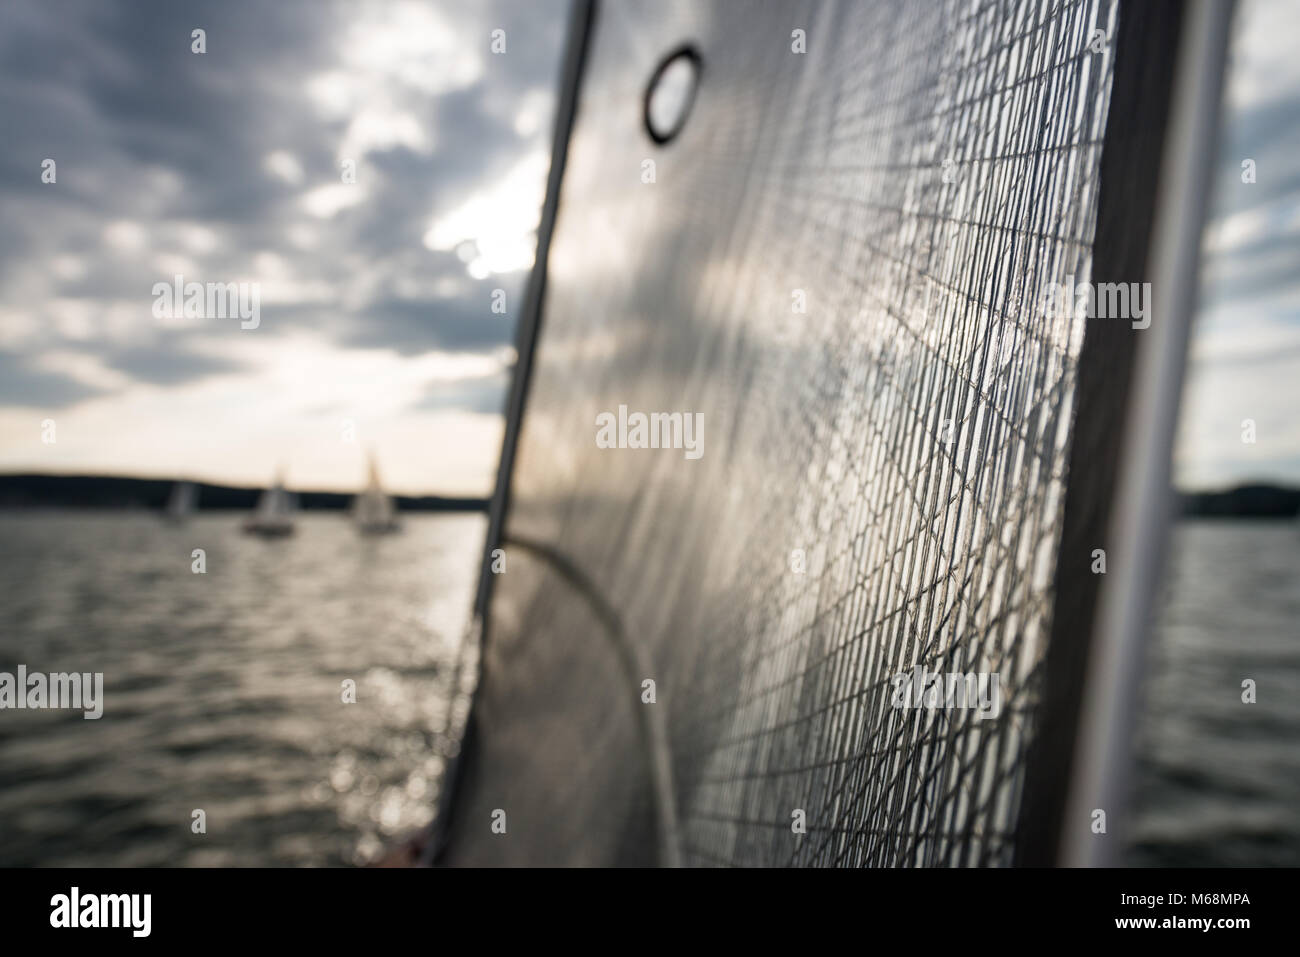 Sails canvas and mast against great cloudy sky - shallow depth of field Stock Photo